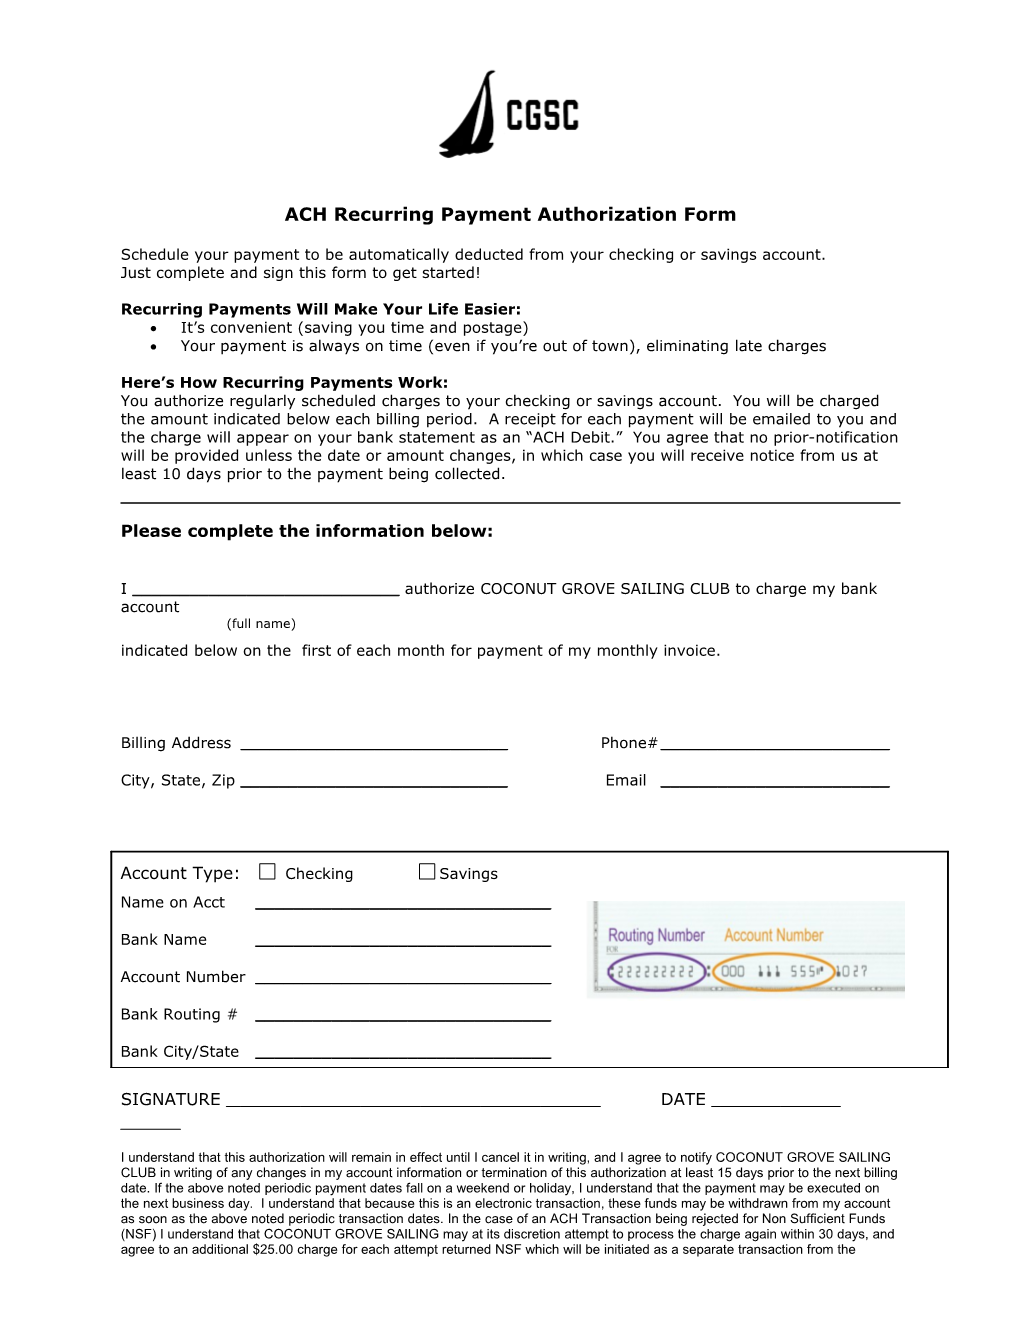 ACH Recurring Payment Authorization Form